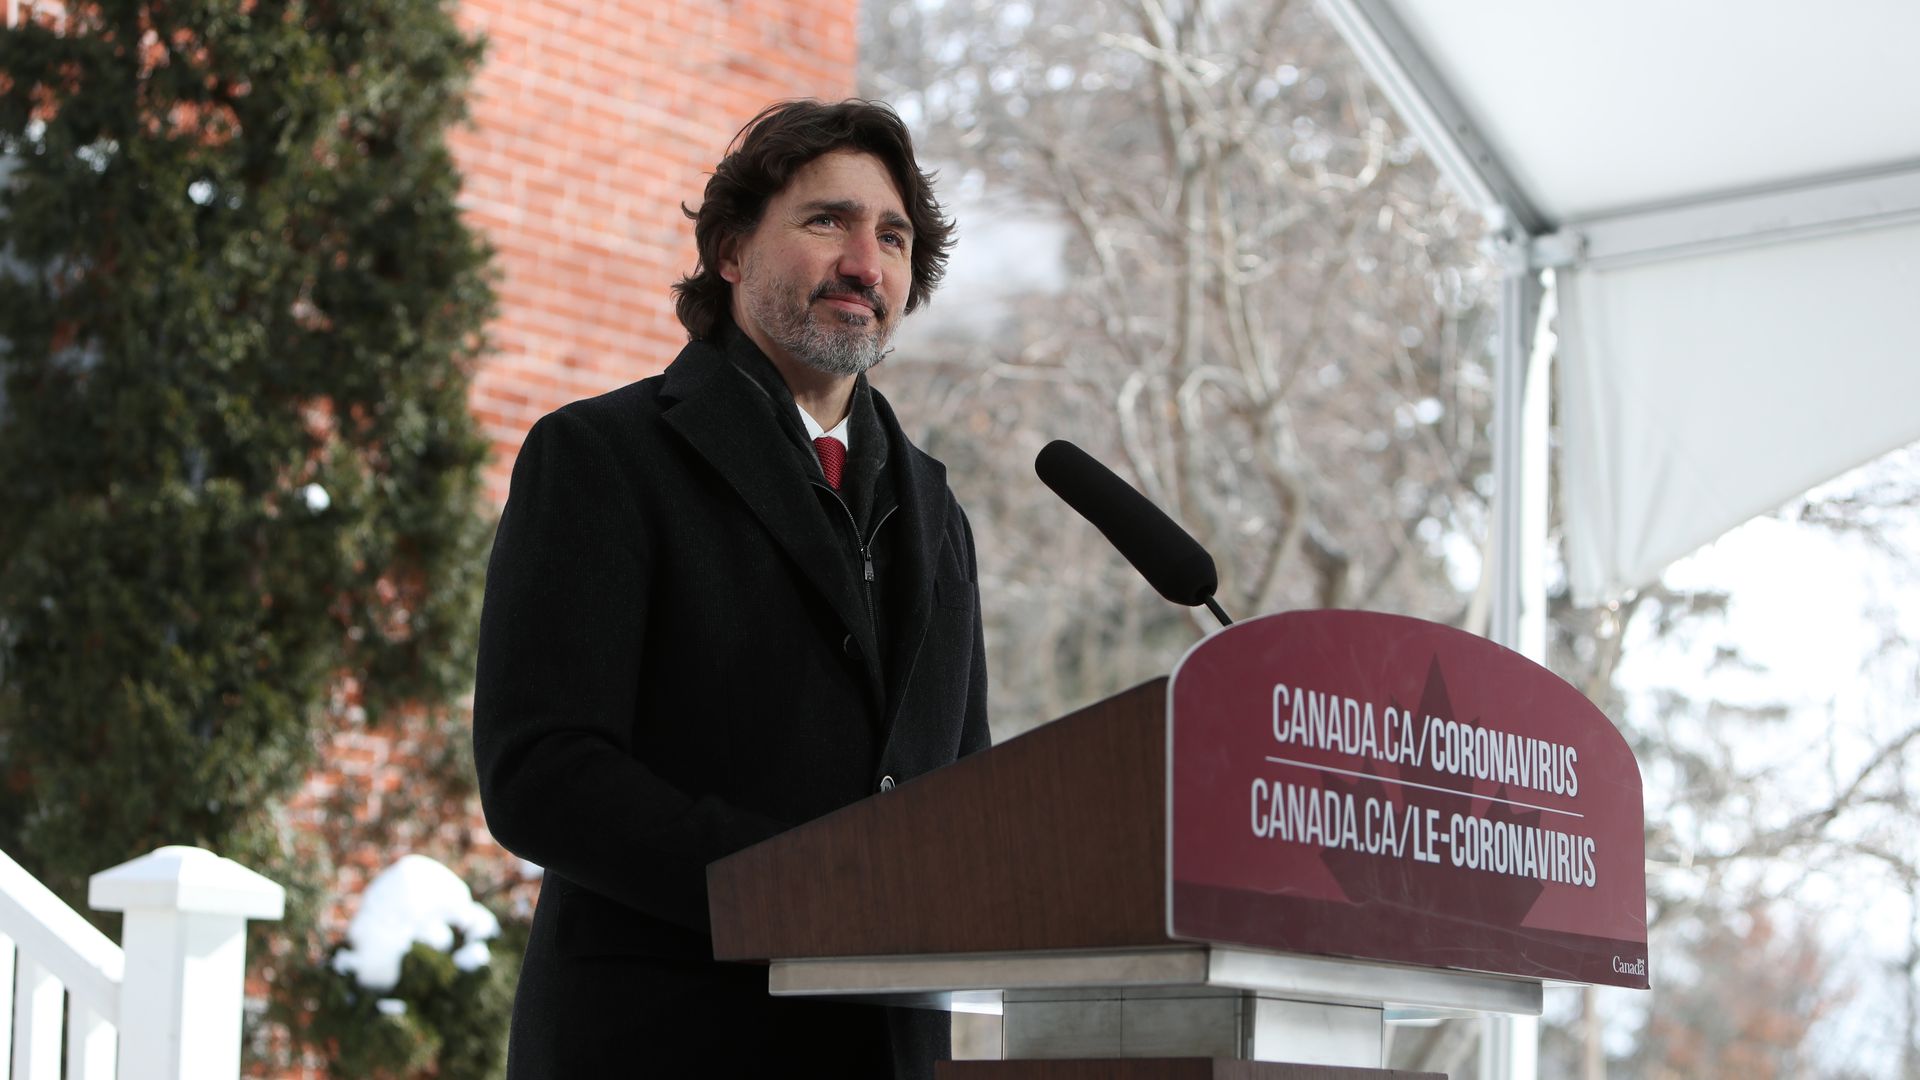 Justin Trudeau, Canada's prime minister, listens during a news conference in Ottawa, Ontario, Canada, on Friday, Feb. 12